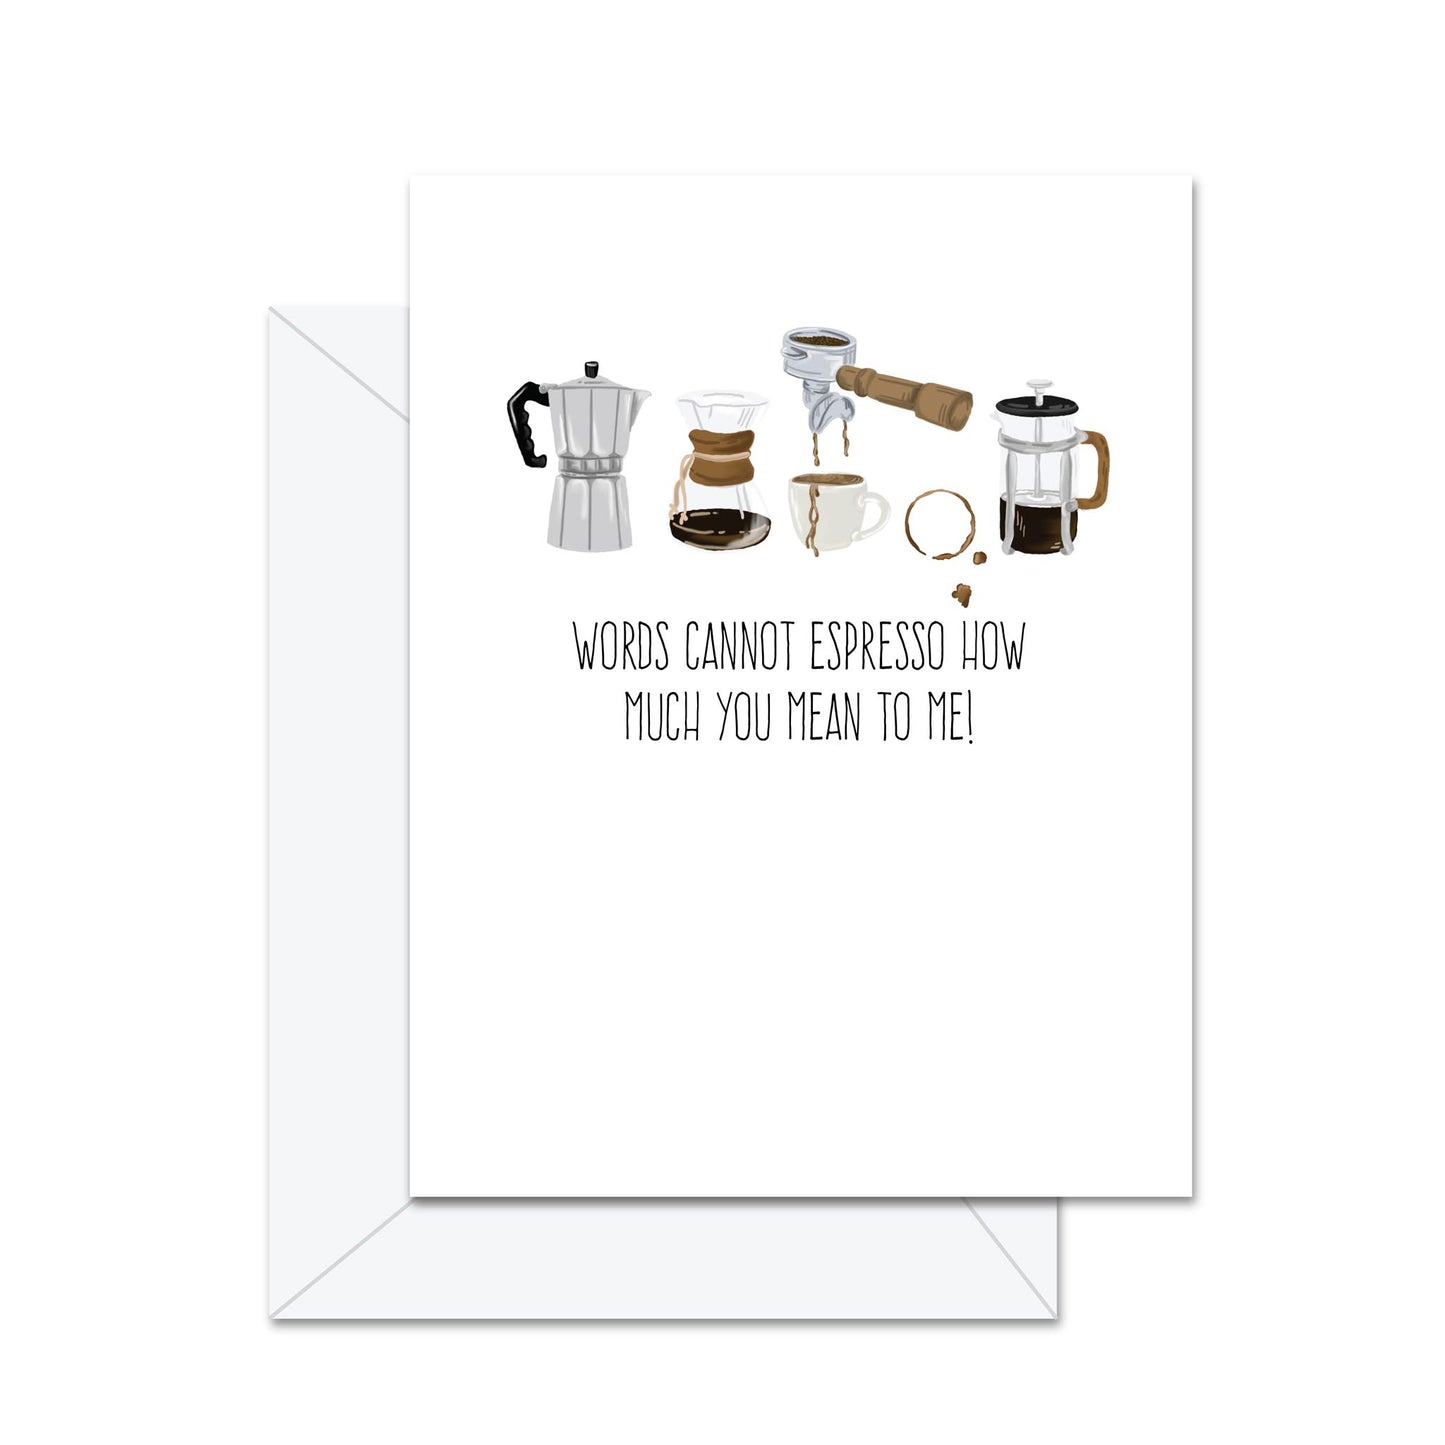 Words Cannot Espresso How Much You Mean To Me - Greeting Card